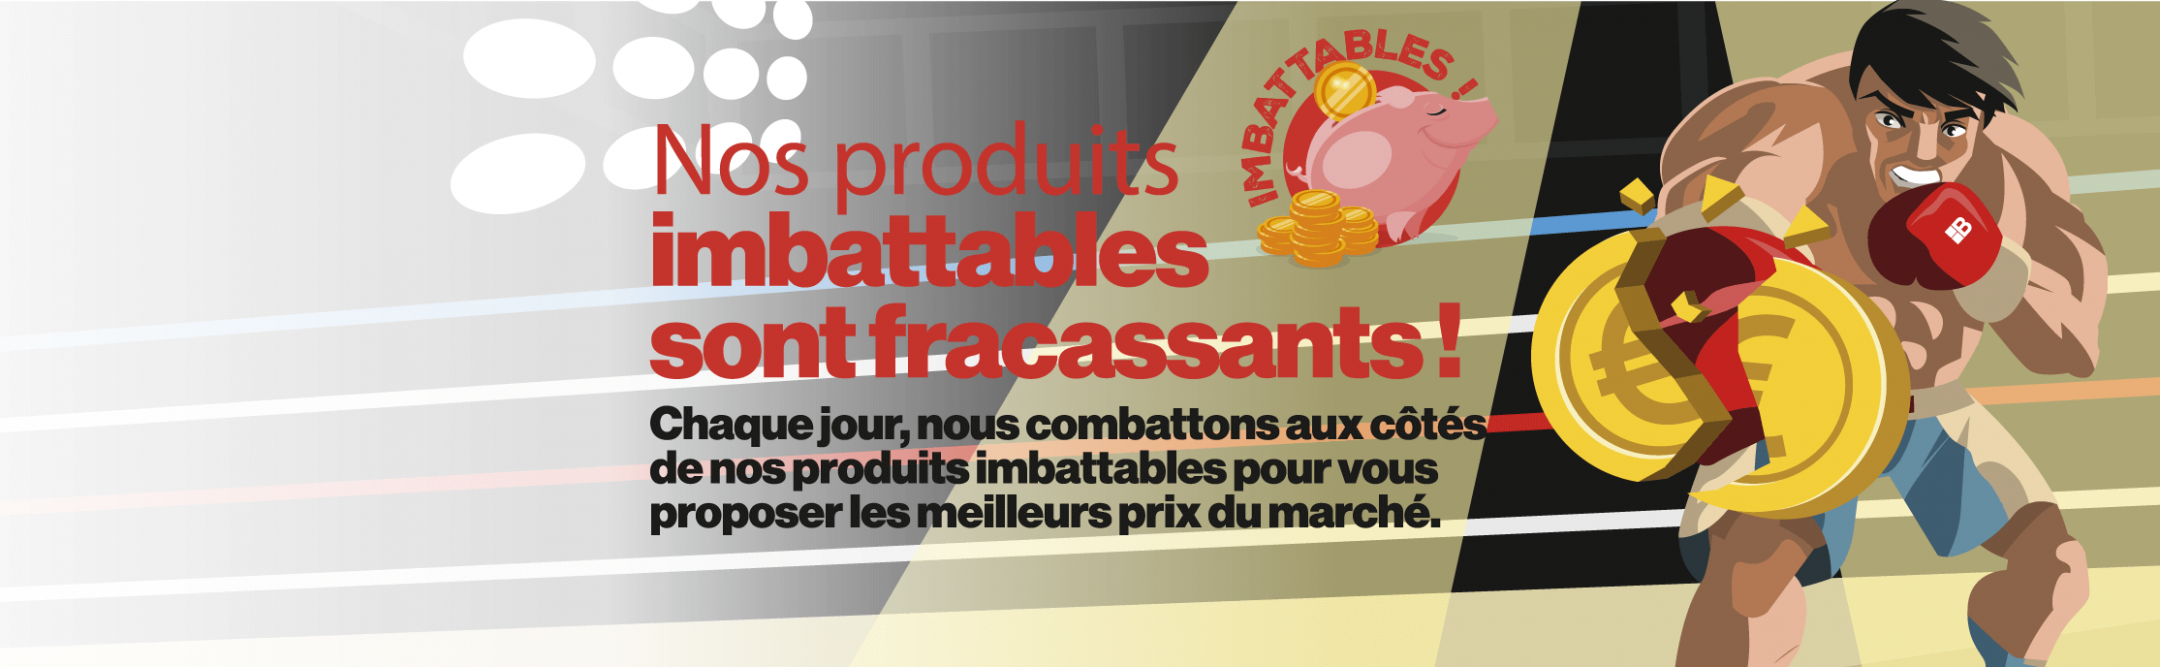 Les Imbattables